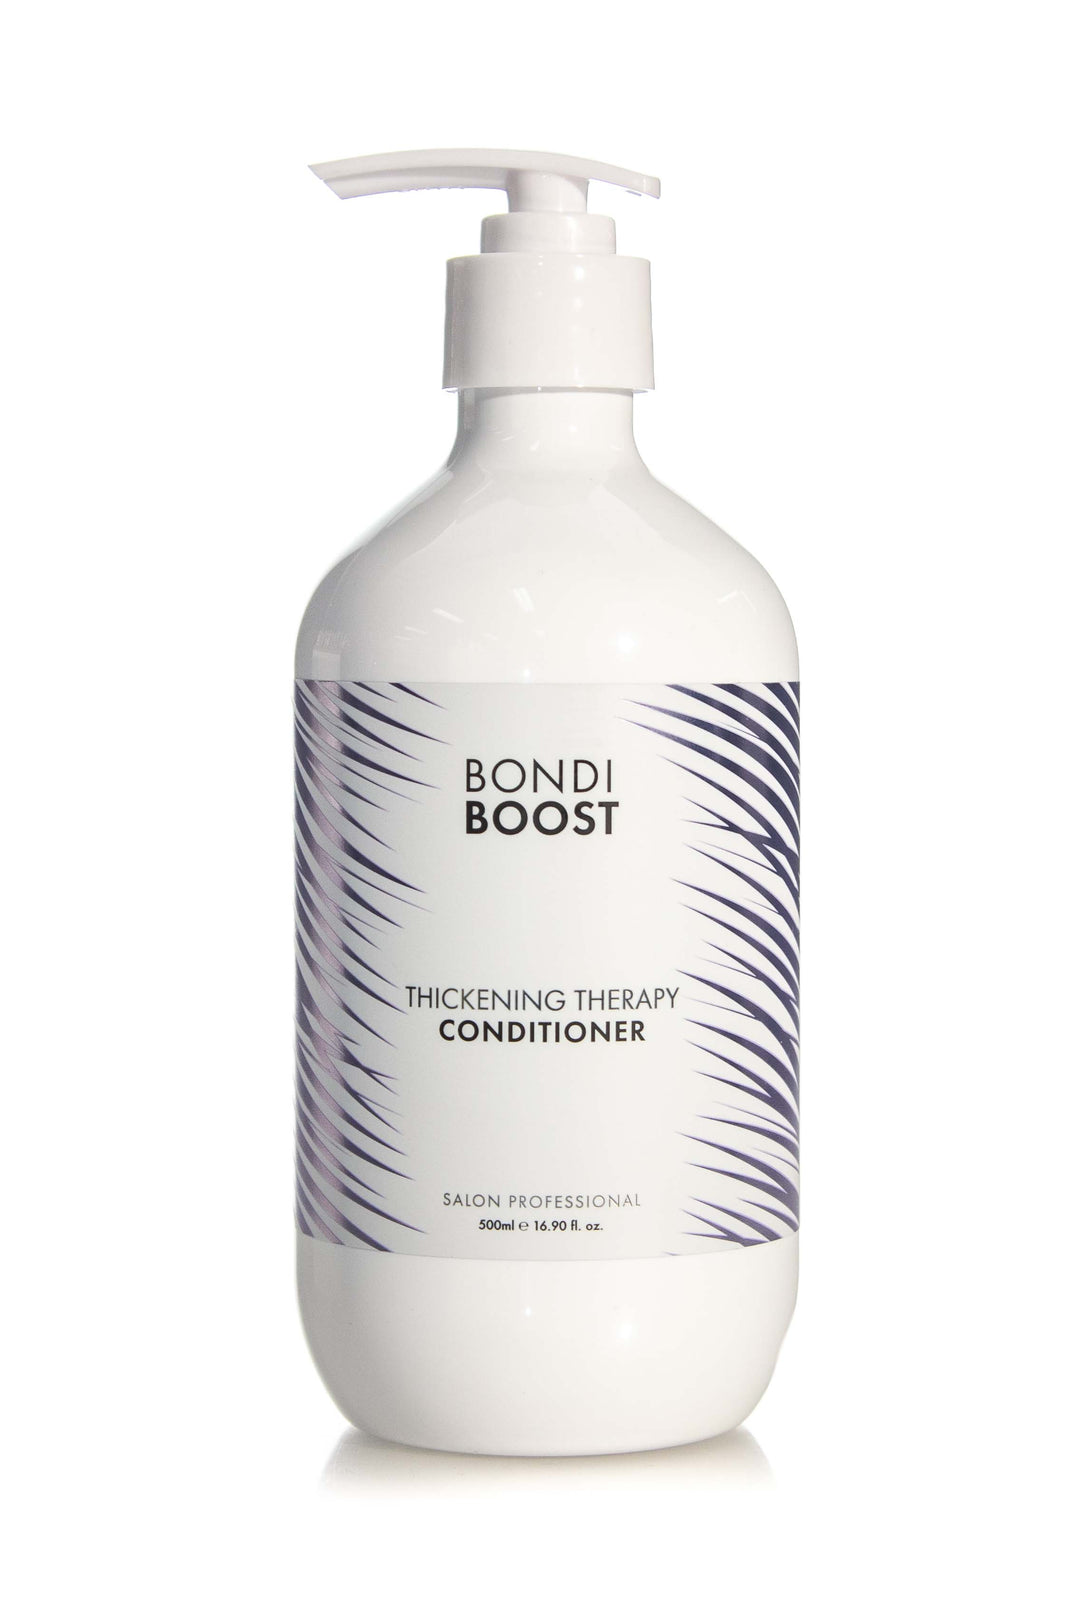 BONDI BOOST Thickening Therapy Conditioner | Various Sizes